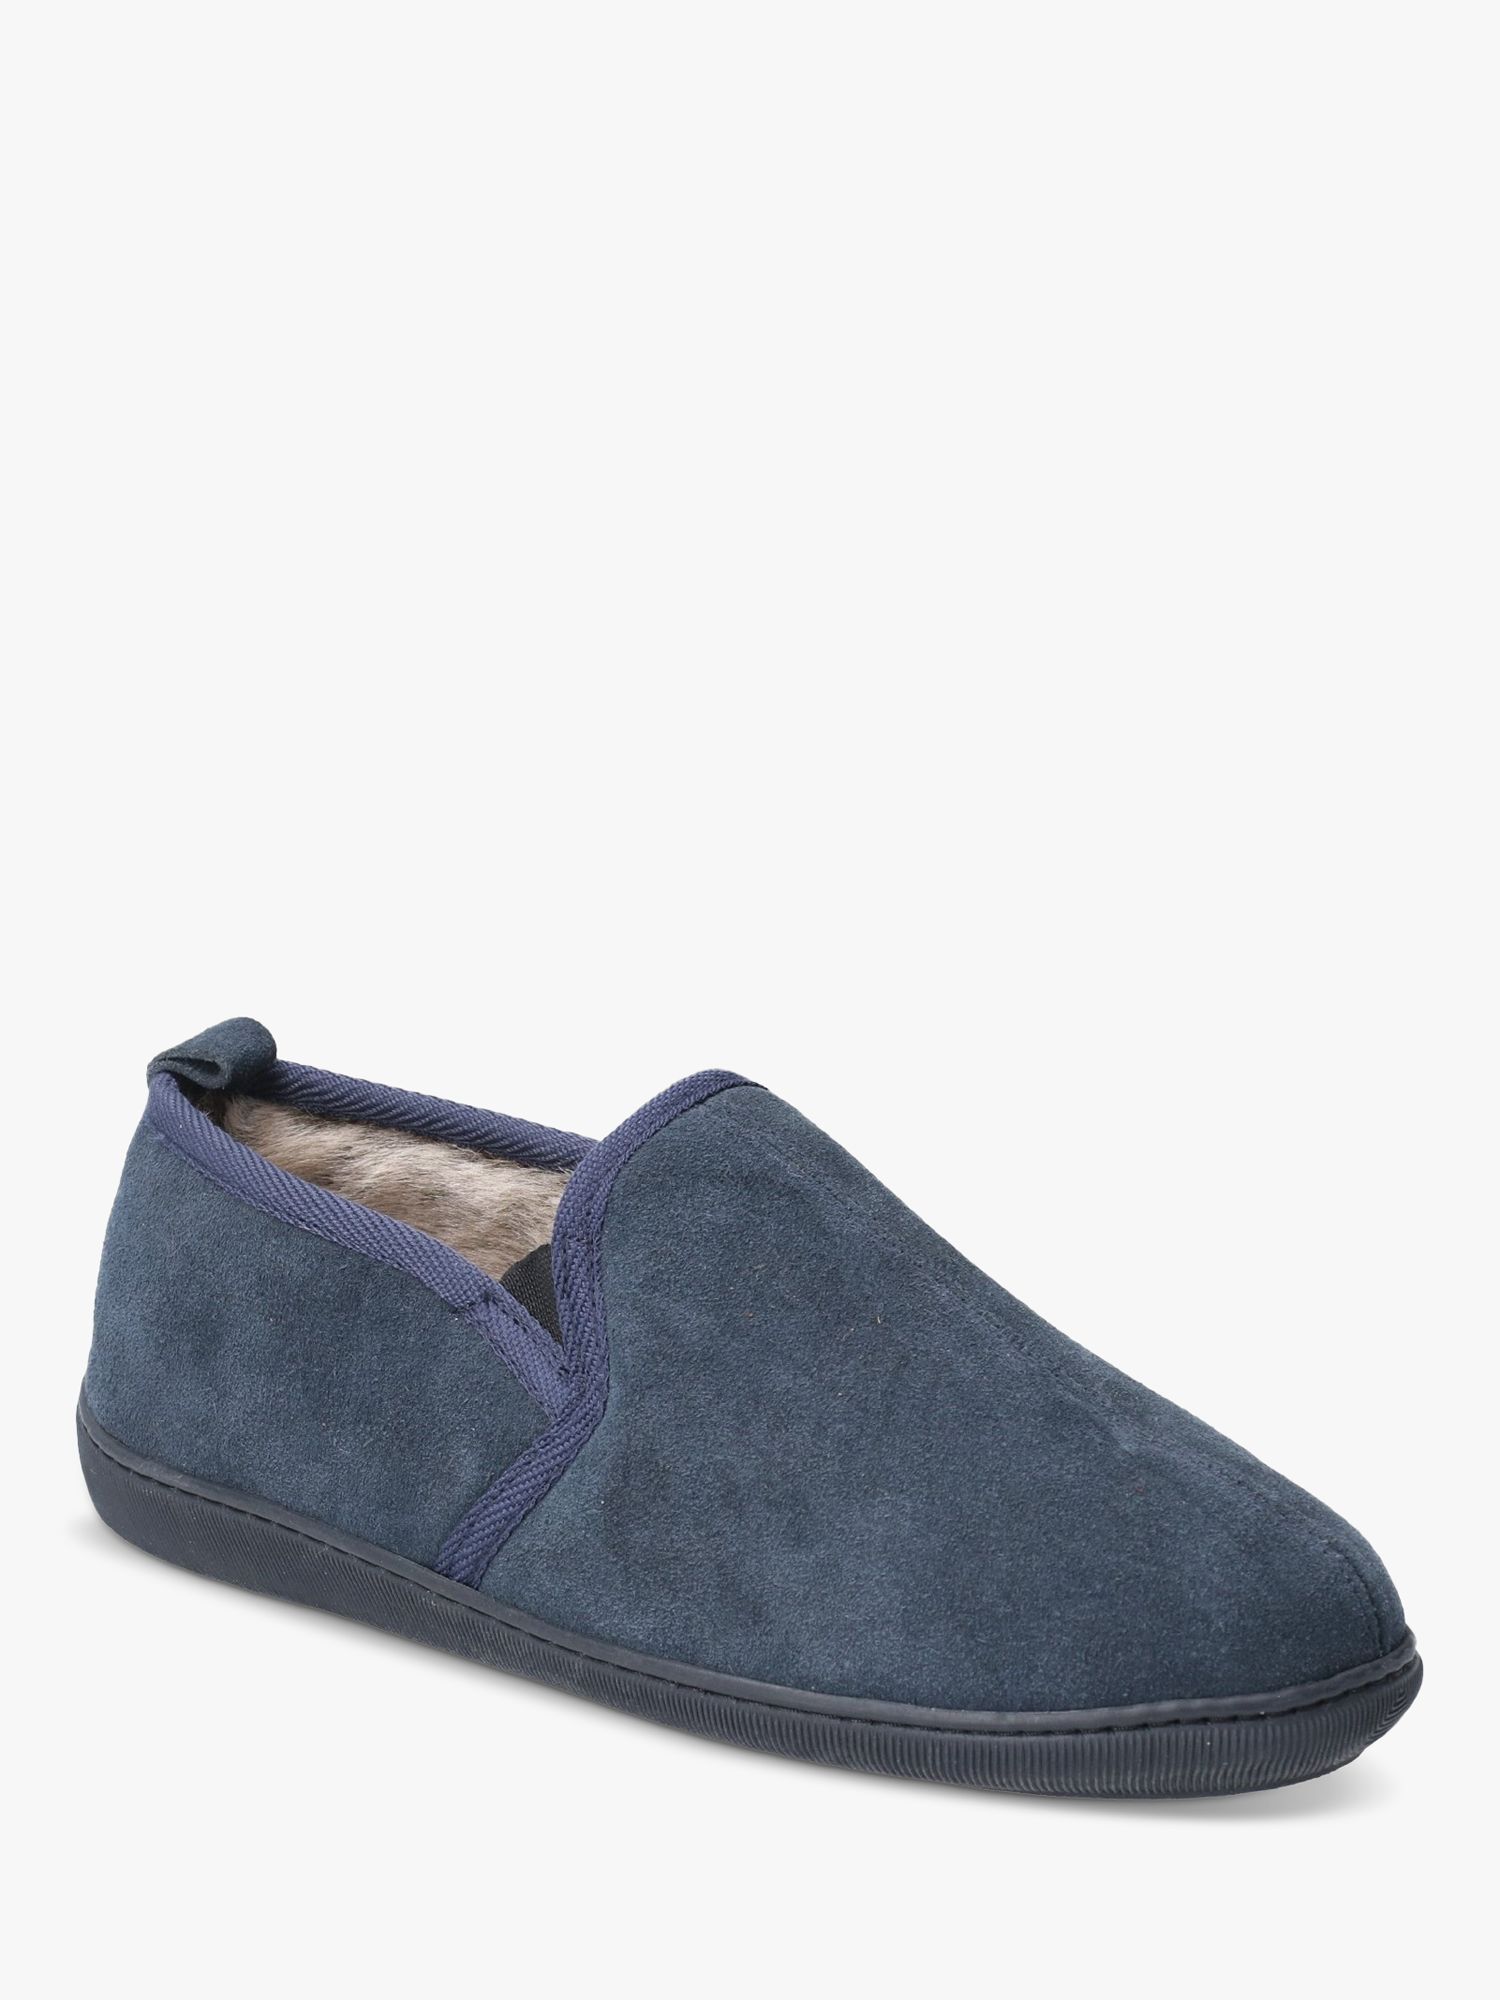 Hush Puppies Arnold Suede Faux Fur Slippers, Navy, 6